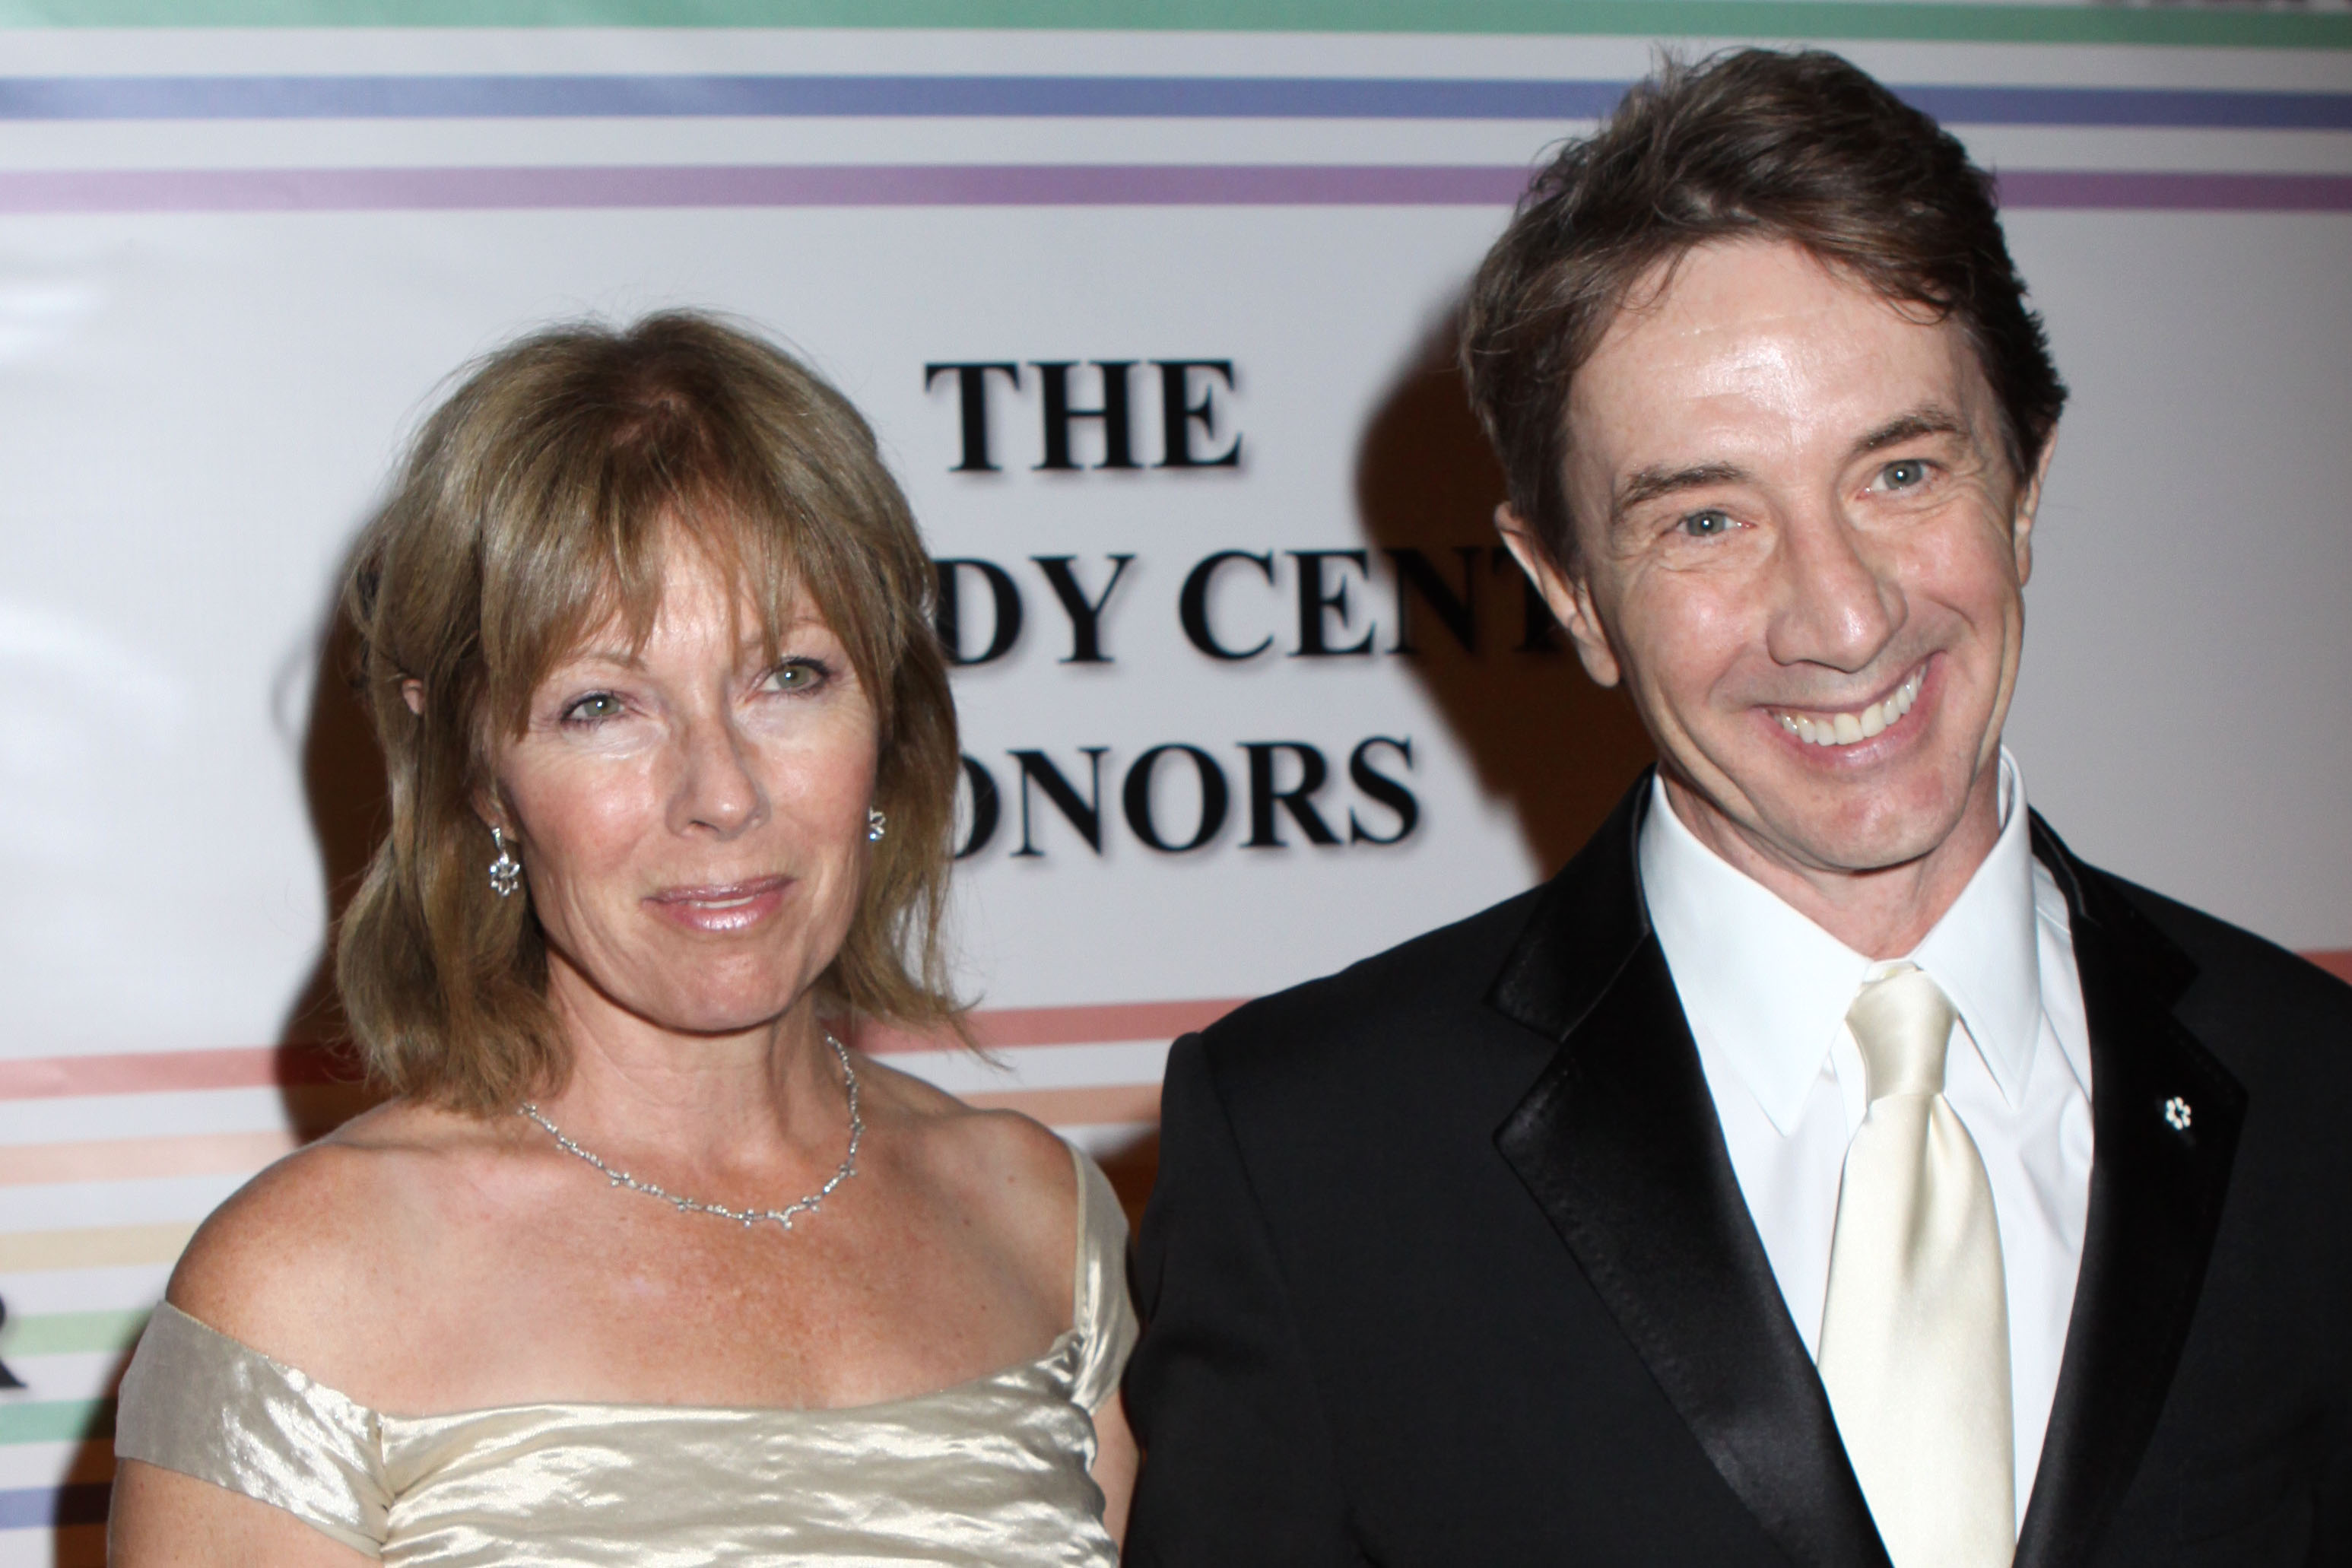 <p><span>"Only Murders in the Building" star Martin Short became a widower on Aug. 21, 2010, when his wife of 30 years, Nancy Dolman, passed away from ovarian cancer. "Our marriage was a triumph. So it's tough," the "Saturday Night Live" alum told </span><a href="https://www.aarp.org/entertainment/celebrities/info-2019/martin-short-interview.html">AARP</a><span> in 2019. "She died in 2010, but I still communicate with her all the time," he noted. "It's 'Hey Nan,' you know? How would she react to this decision or that, especially regarding our three kids." Martin and Nancy are seen here in 2009 -- less than a year before he lost her.</span></p>